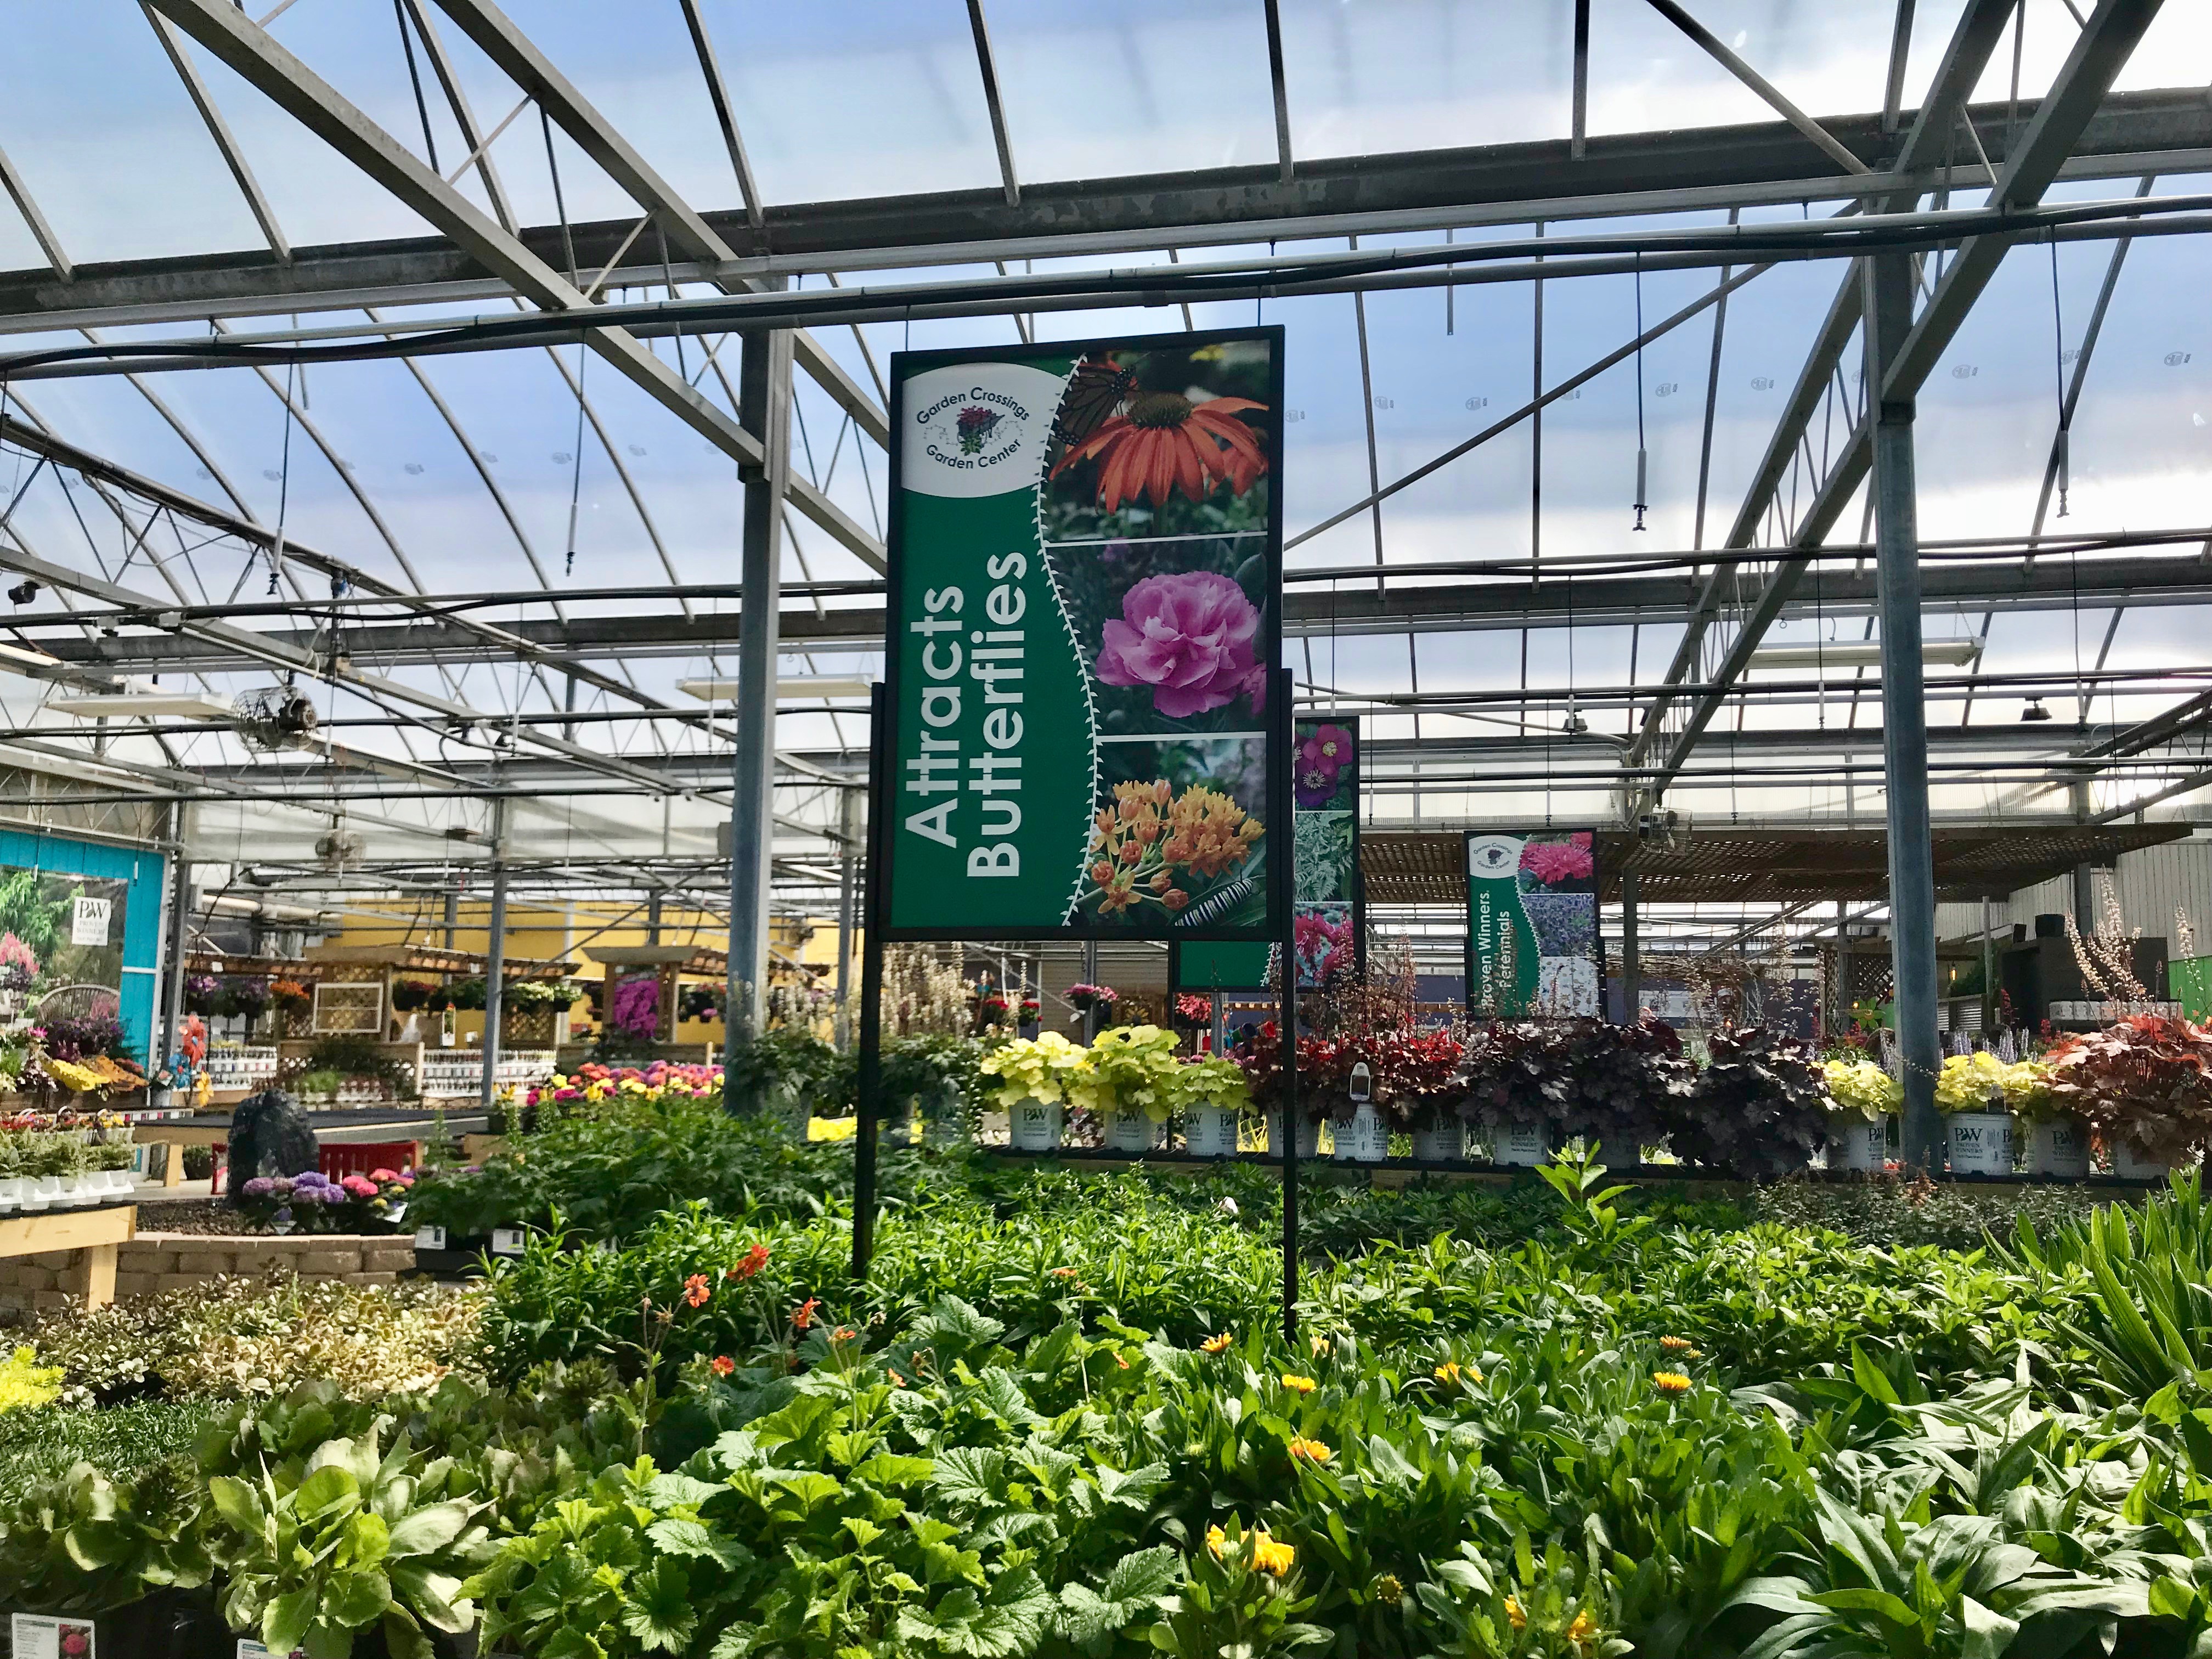 Sign in greenhouse